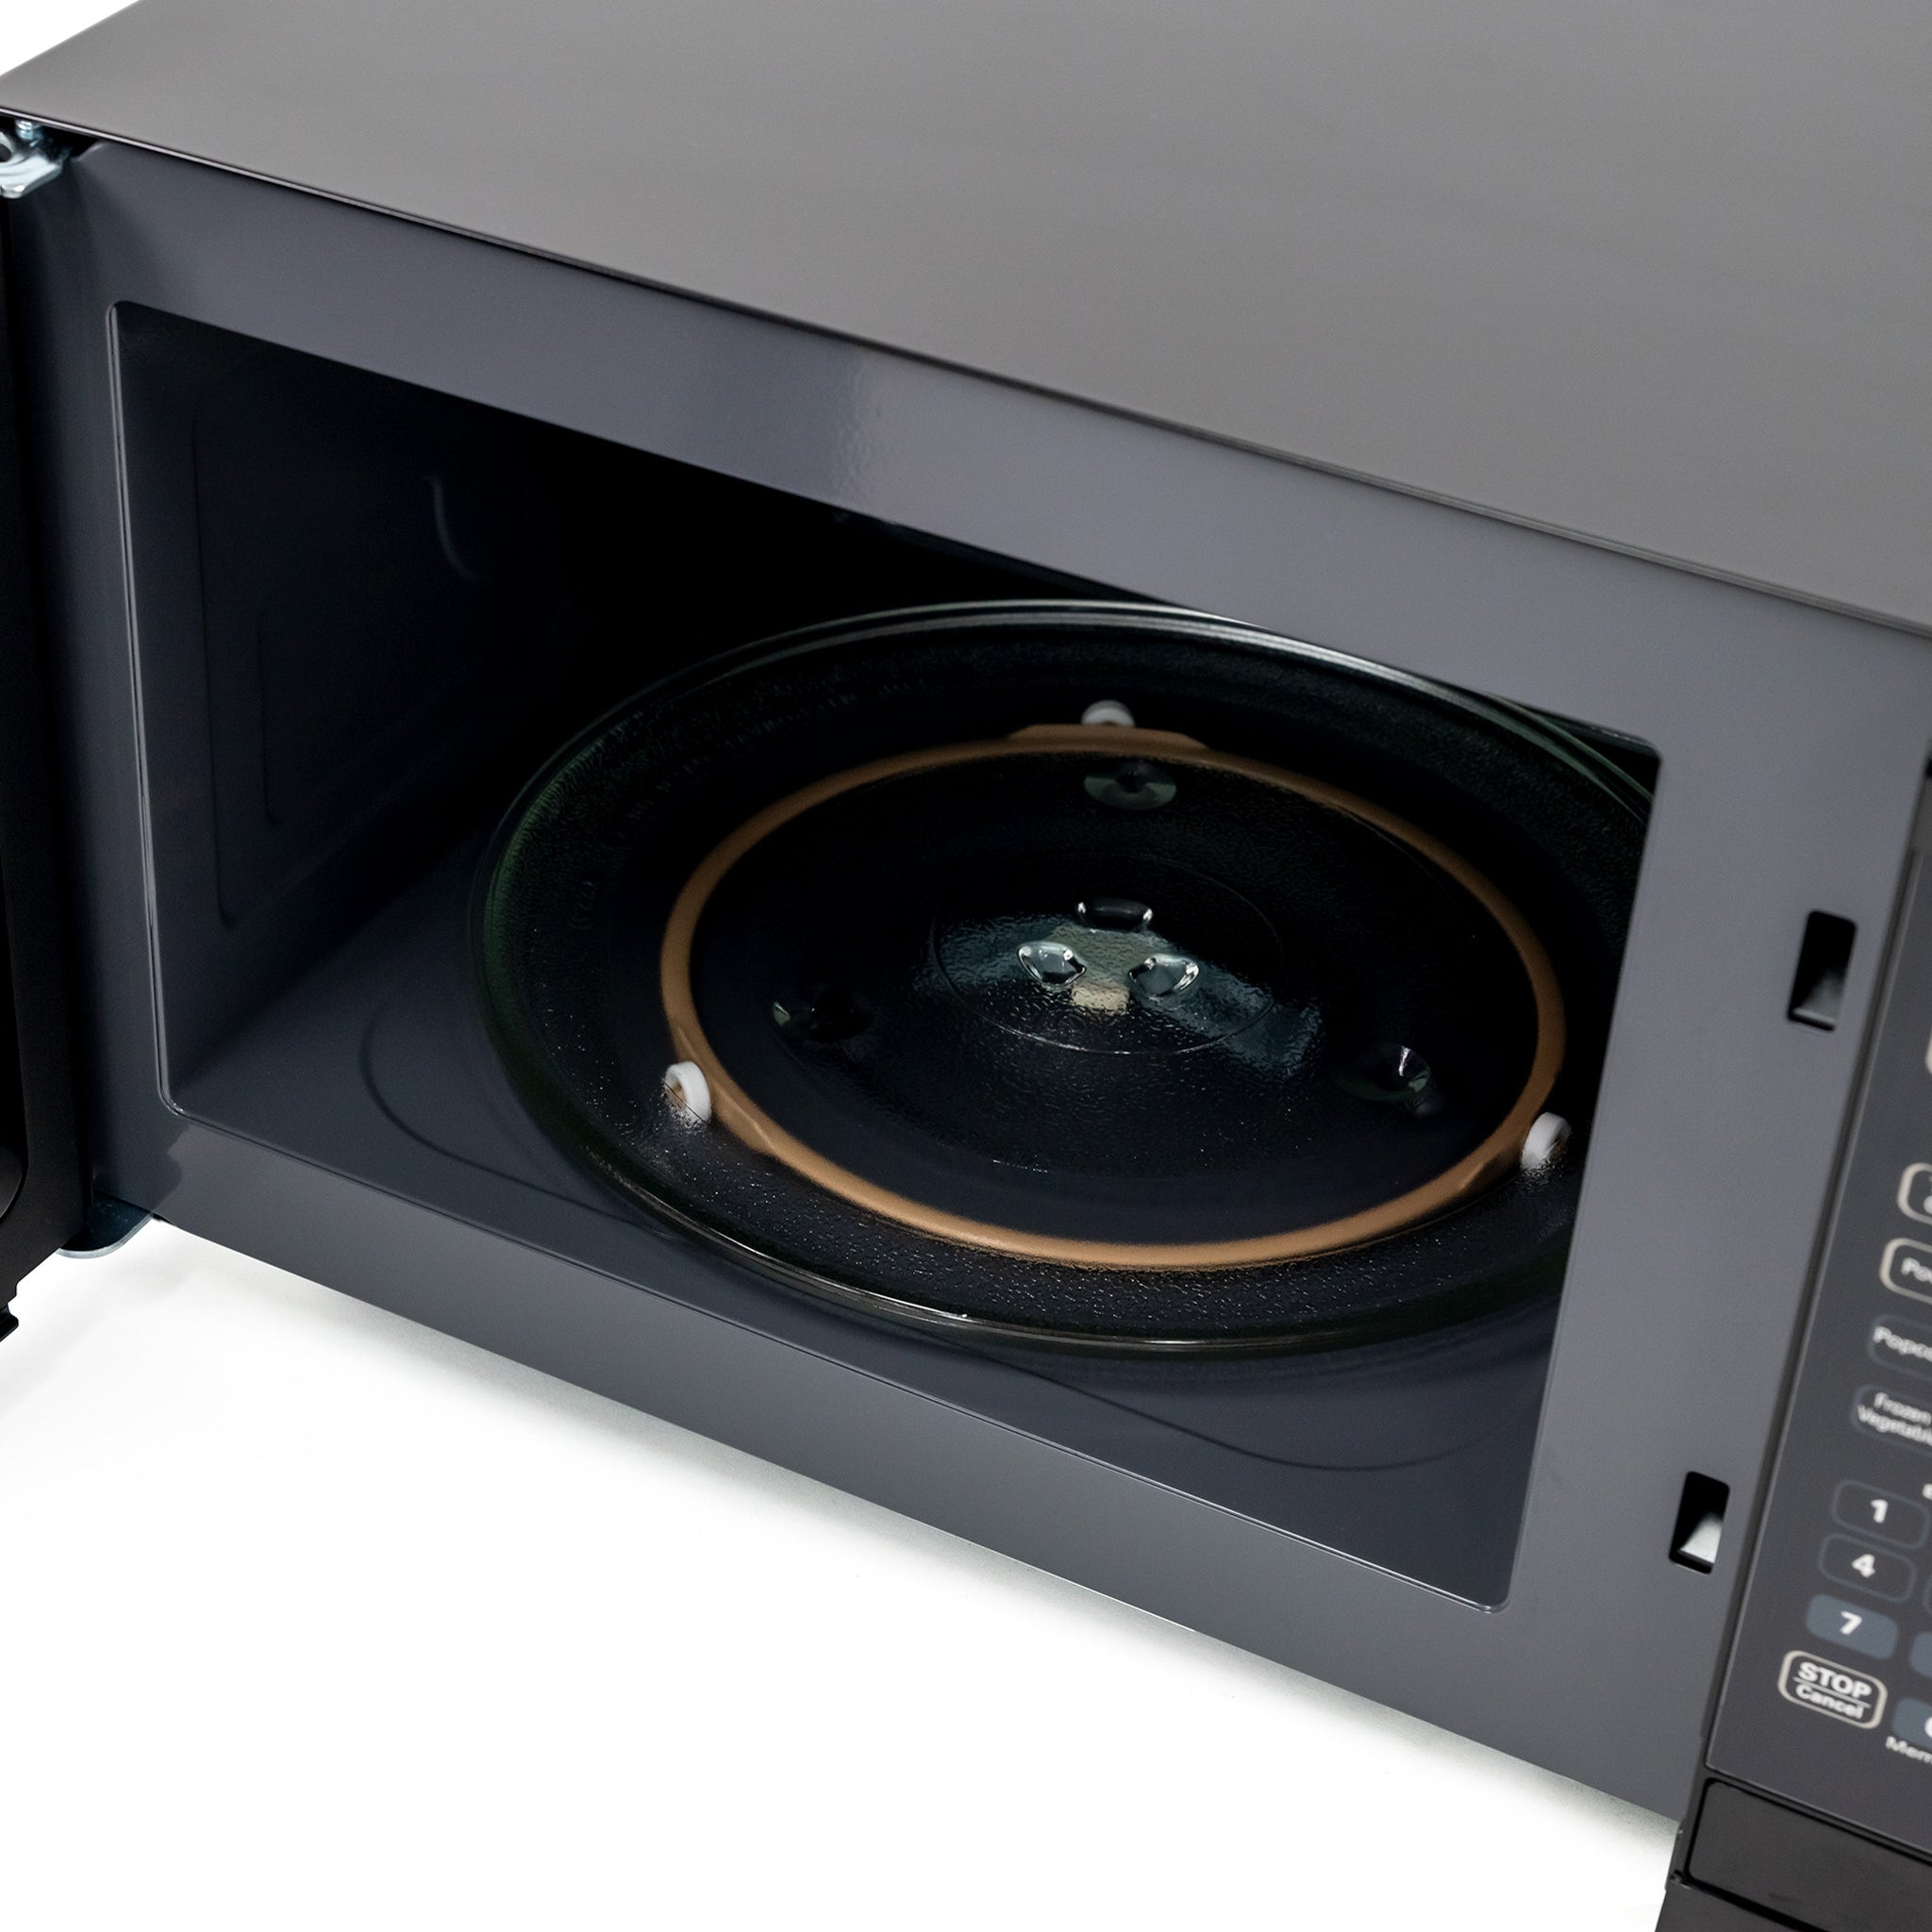 25L Microwave Oven